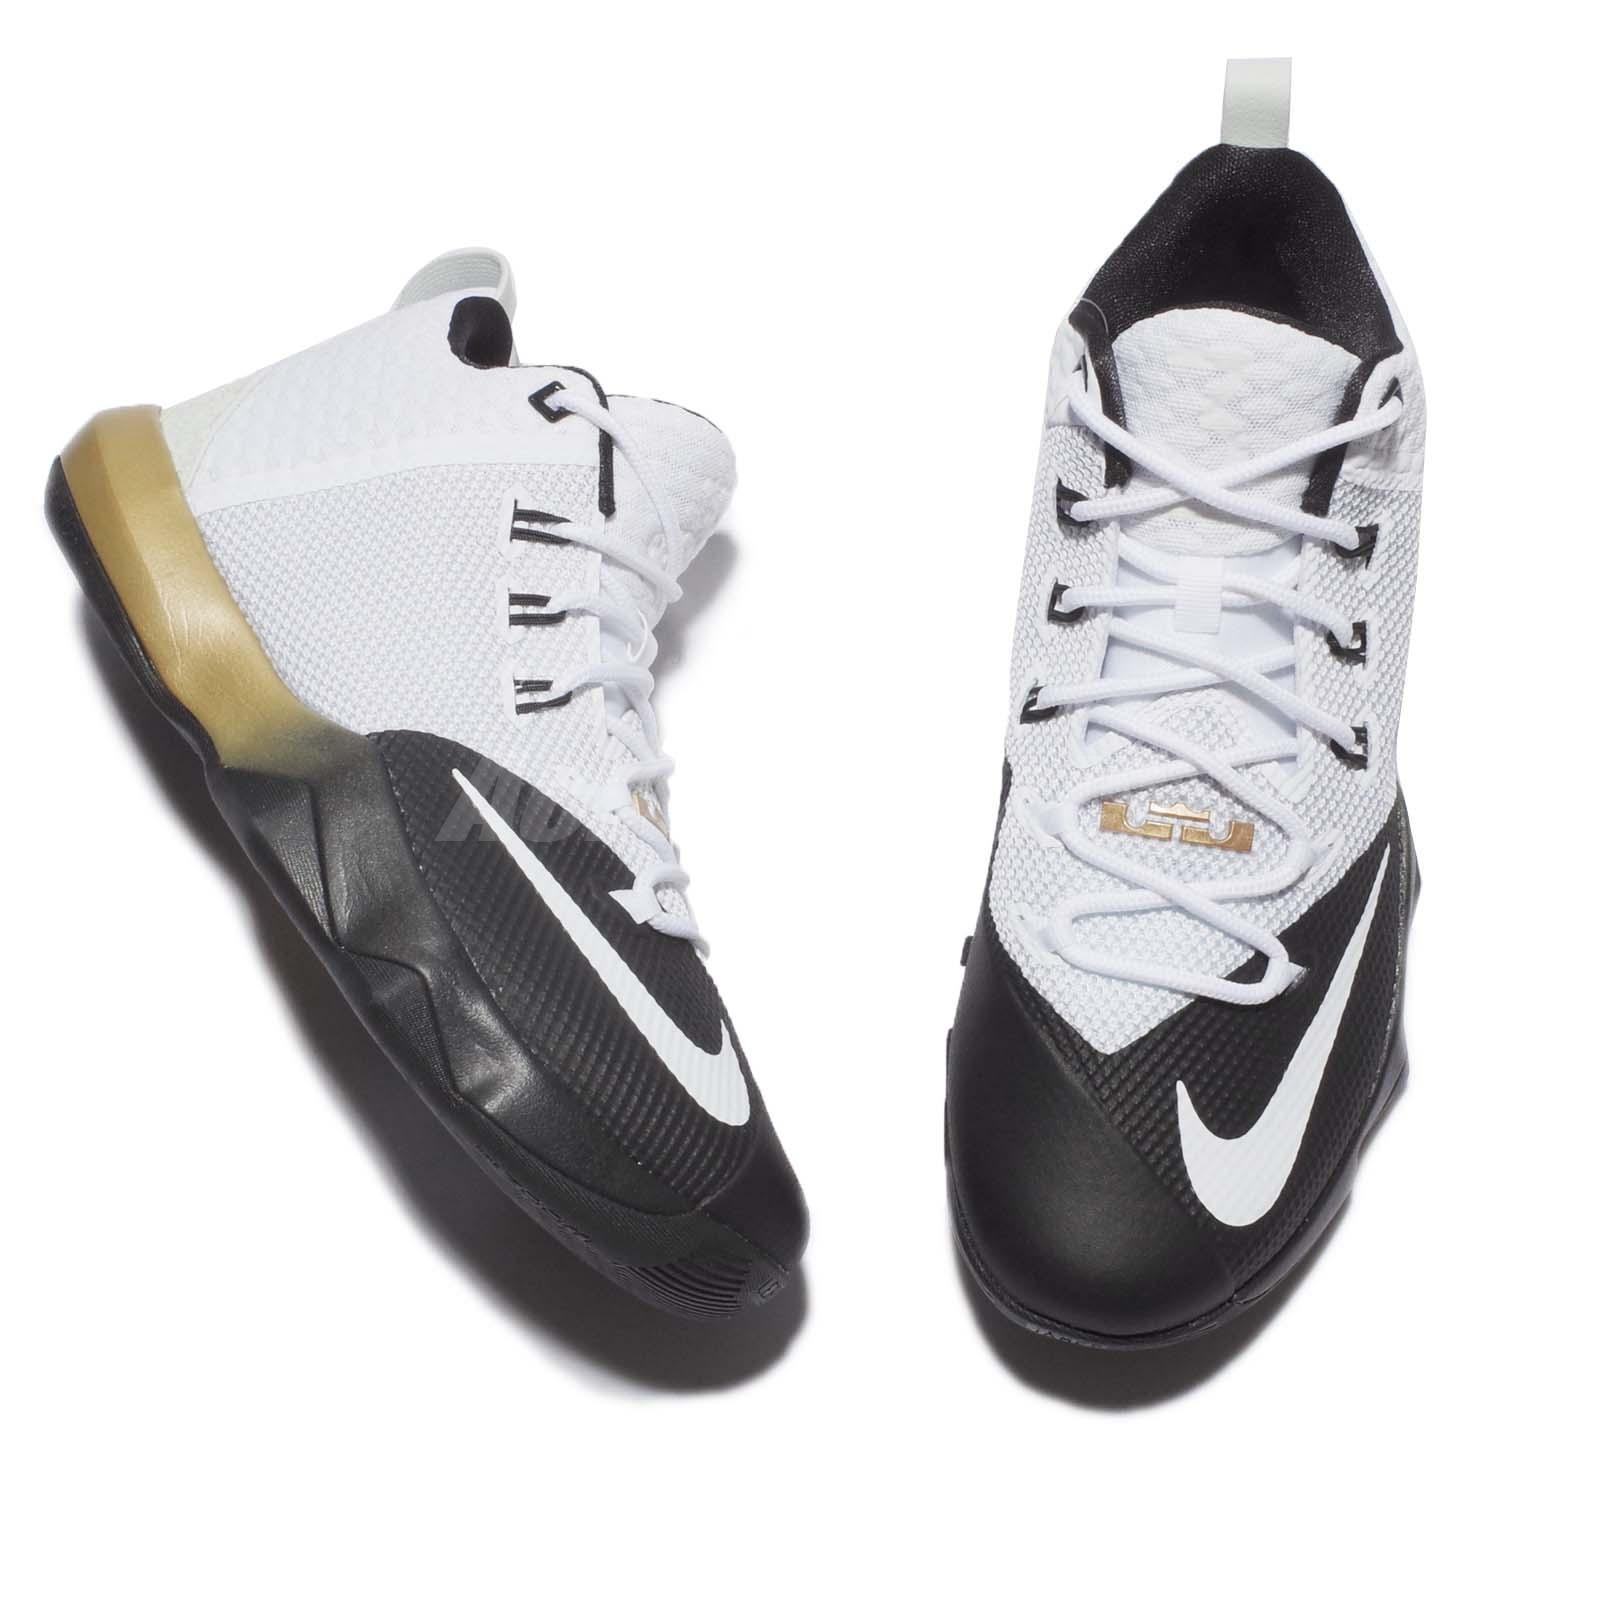 Whichever not to mention Parcel The Nike LeBron Ambassador IX Black/Gold | Available Now - WearTesters